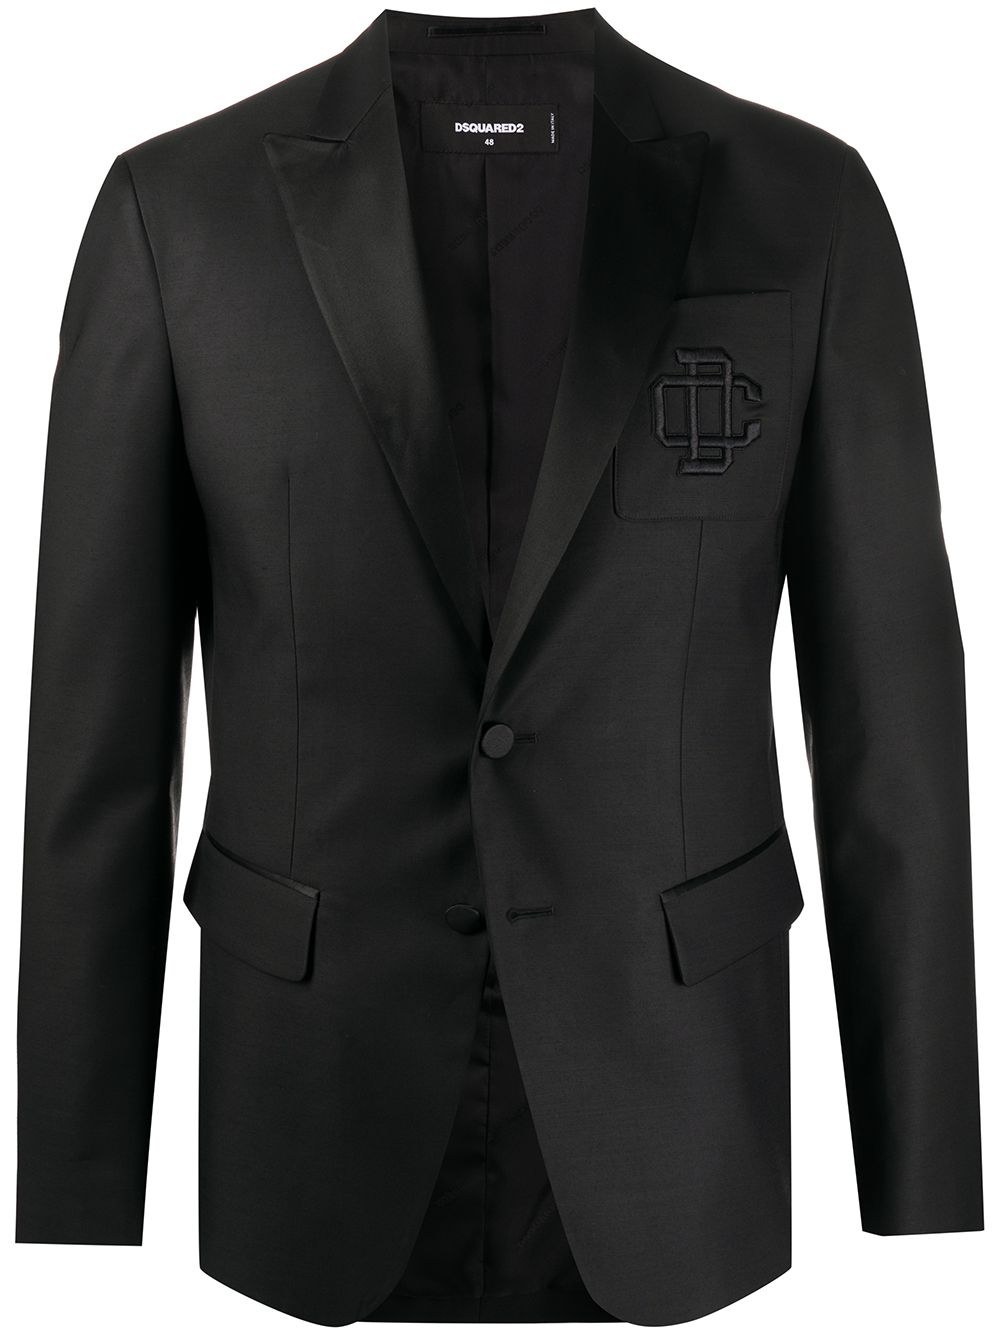 DSQUARED2 Luxurious Black Esmoquin for the Modern Man